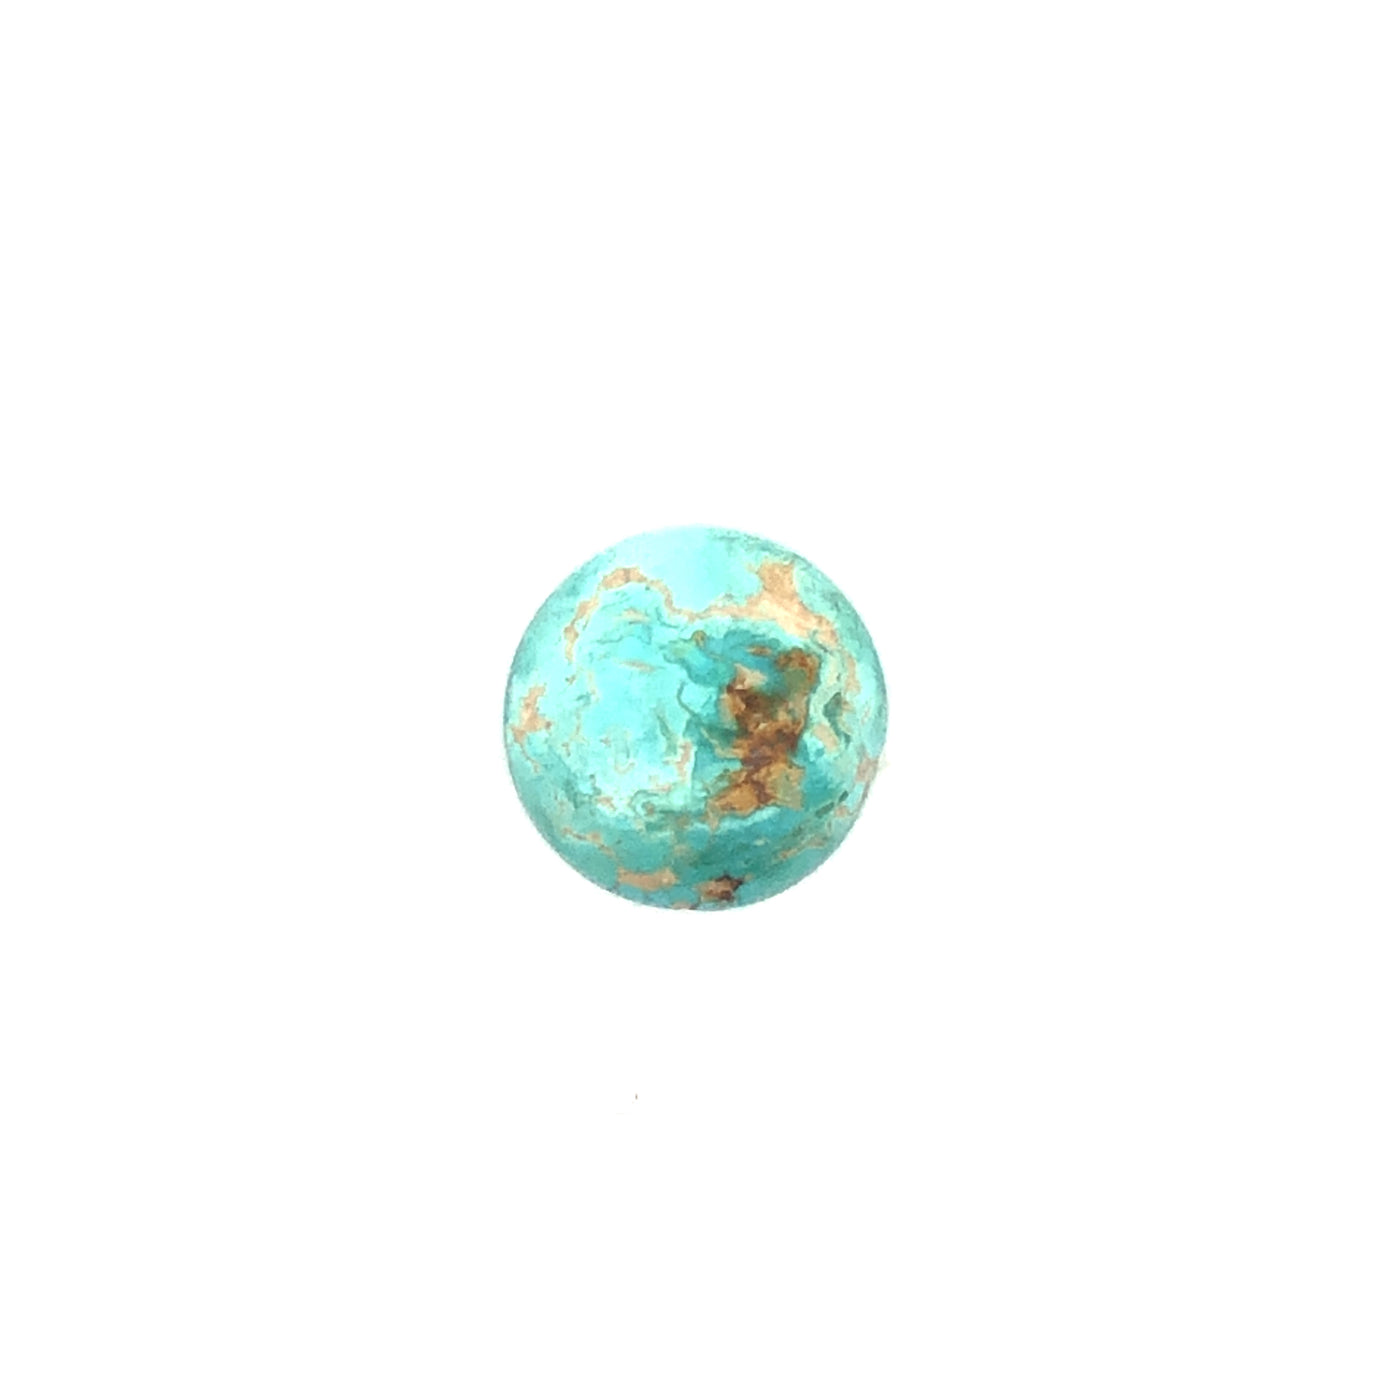 Loose Narooma Turquoise Round Shaped 9.69Ct Blue With Some Brown